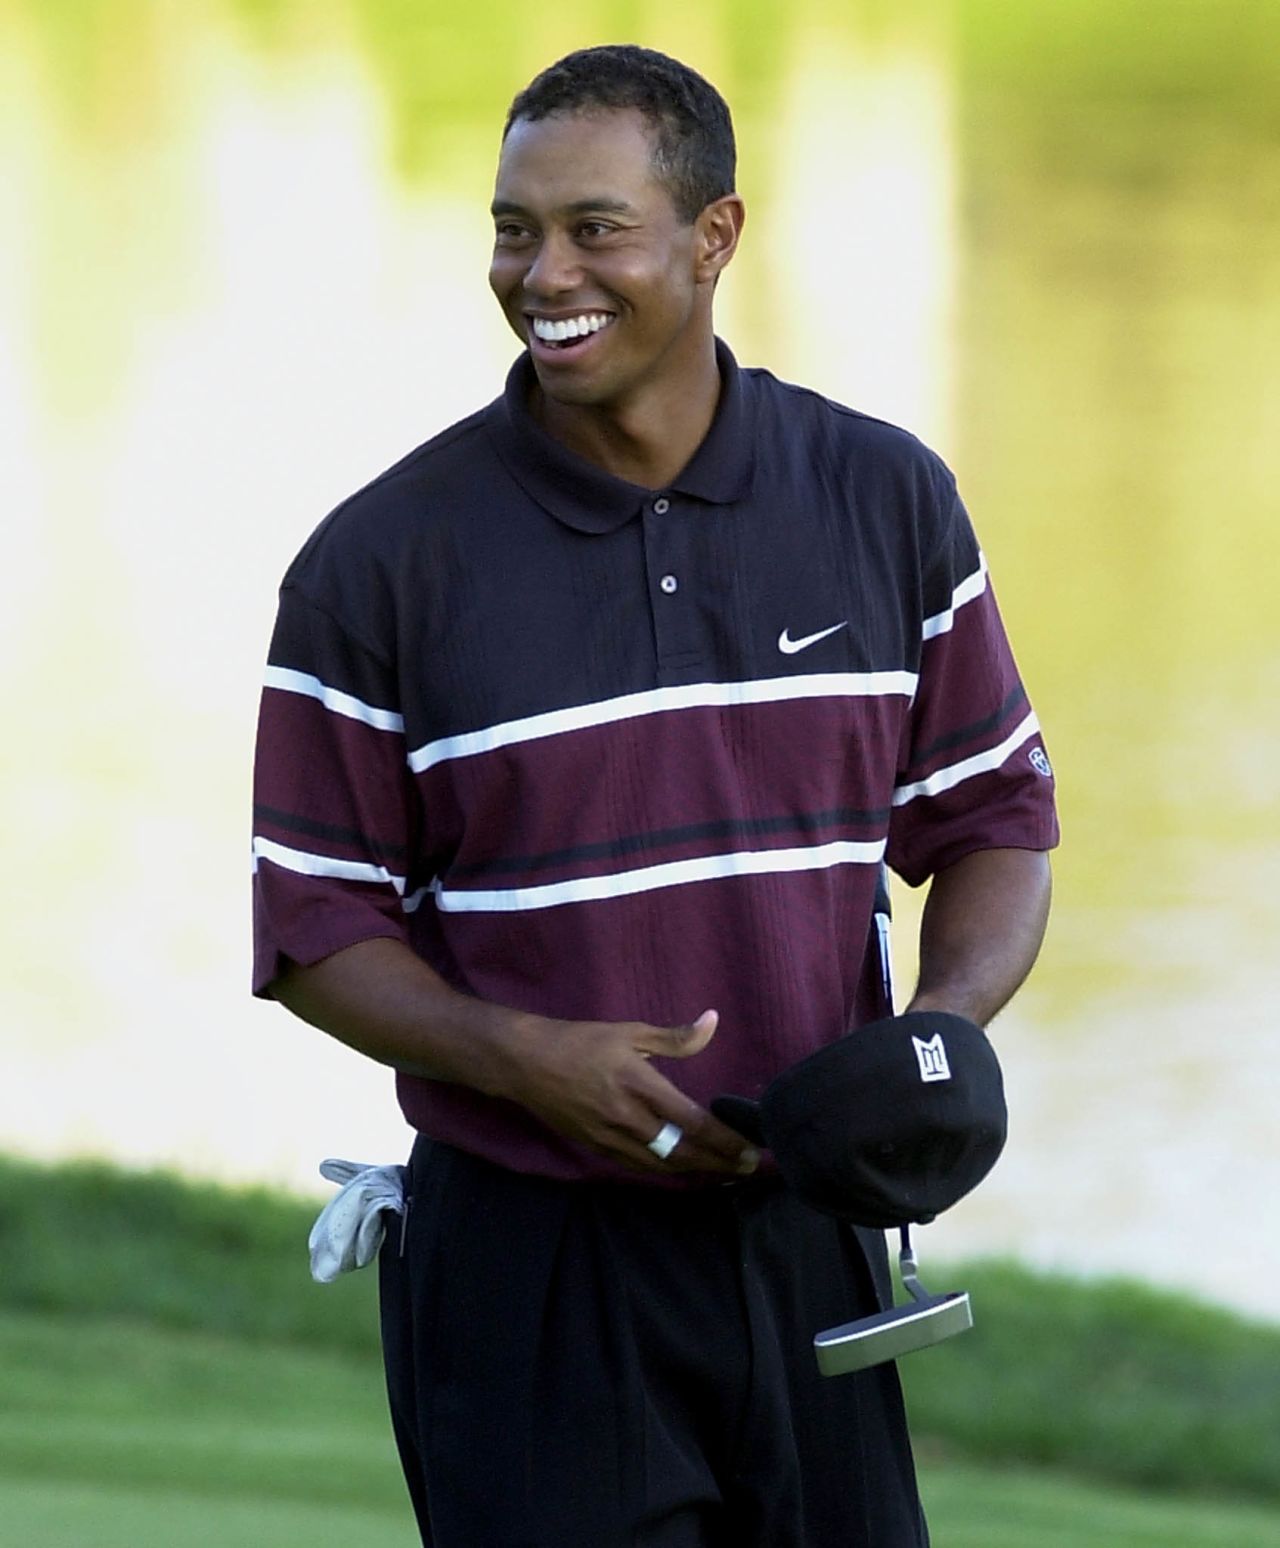 And Woods was once again victorious at Bay Hill in 2002, sealing a hat-trick of wins at the event.